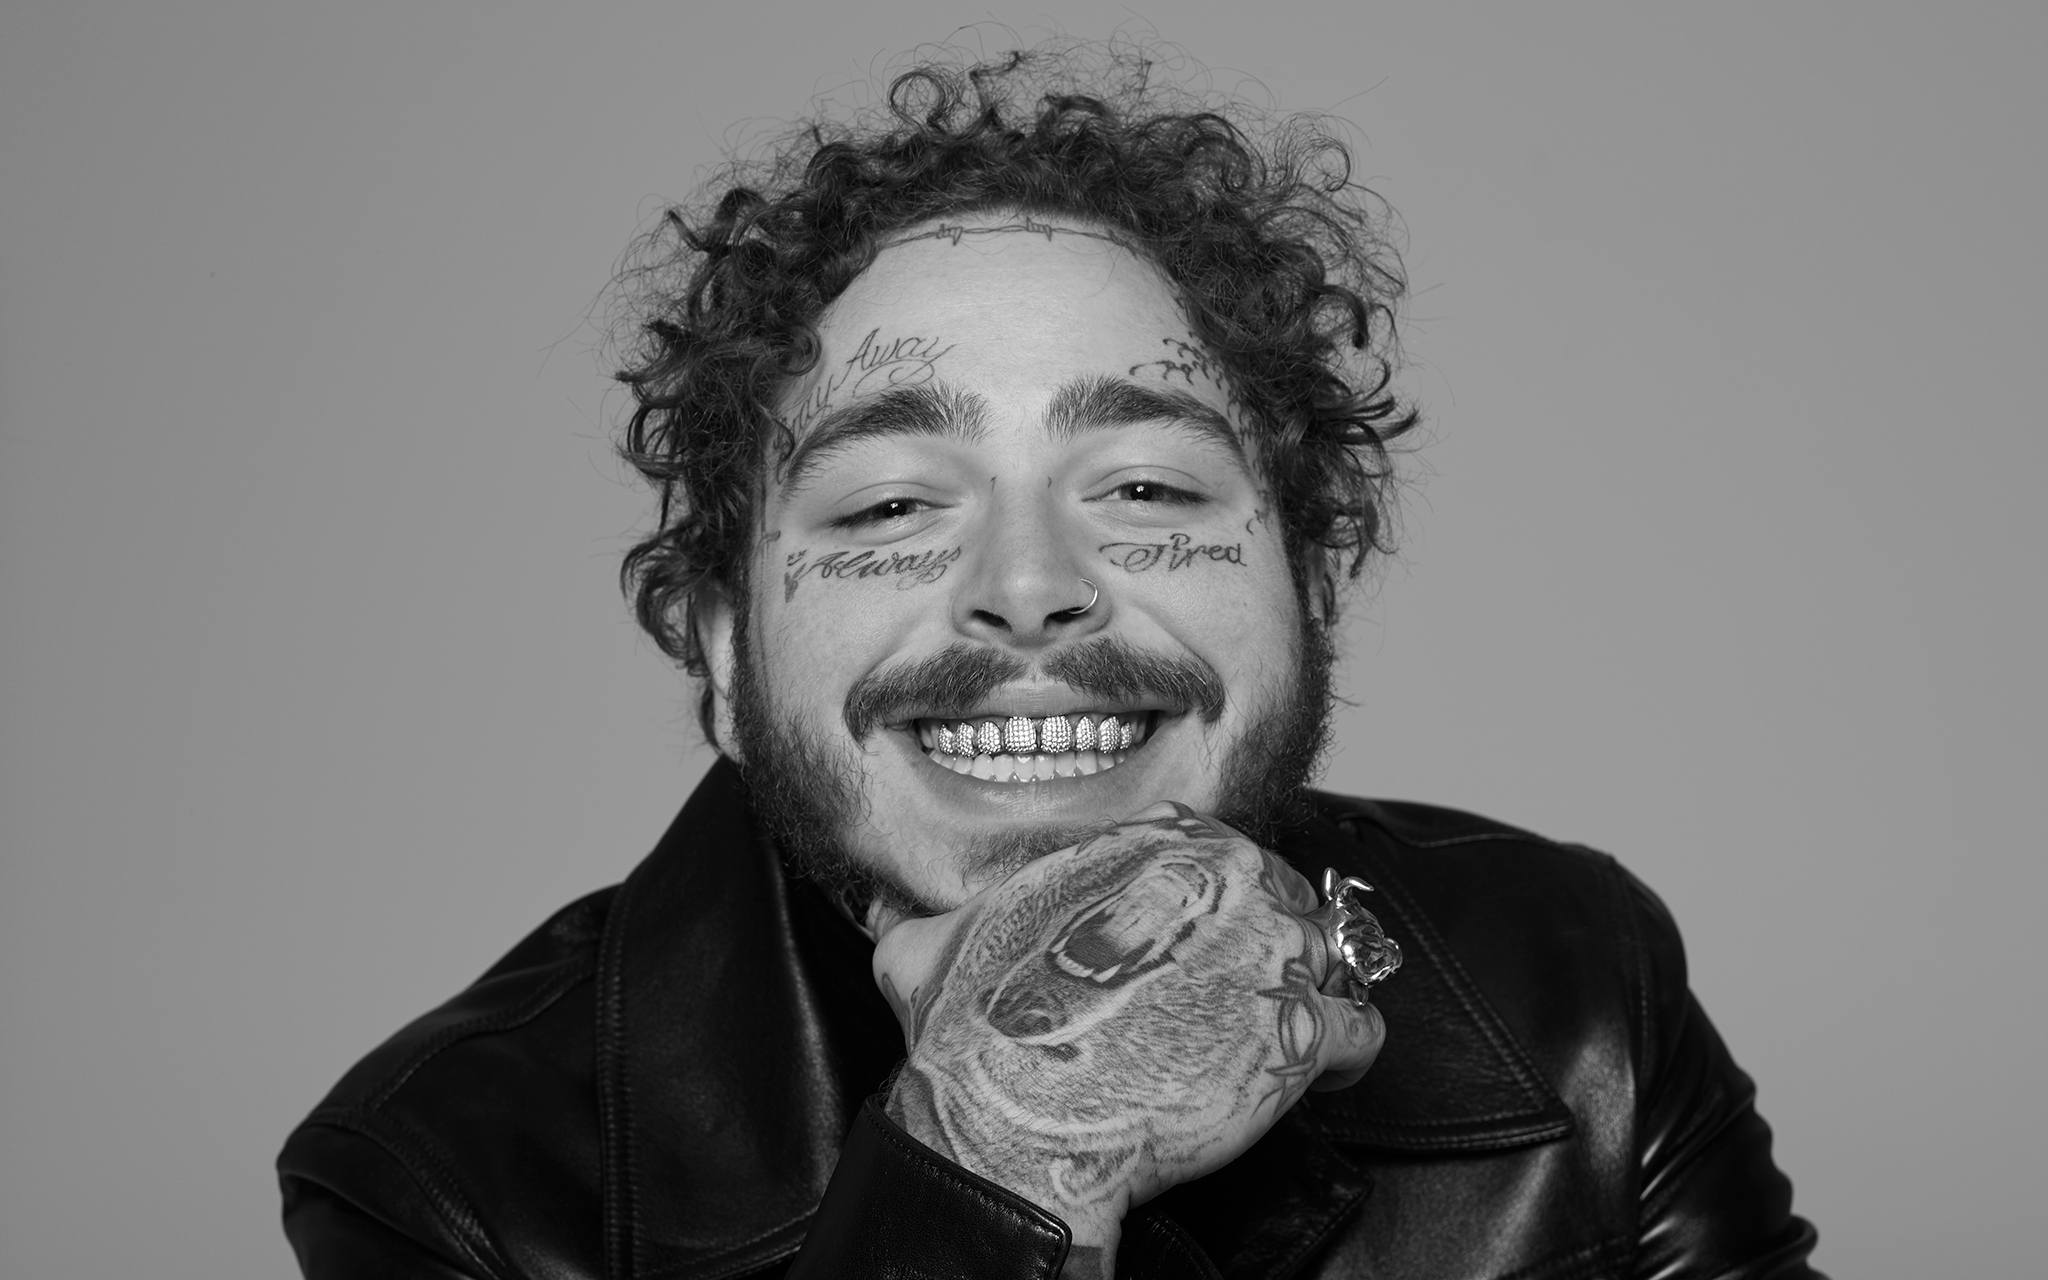 Post Malone. New Music About Her